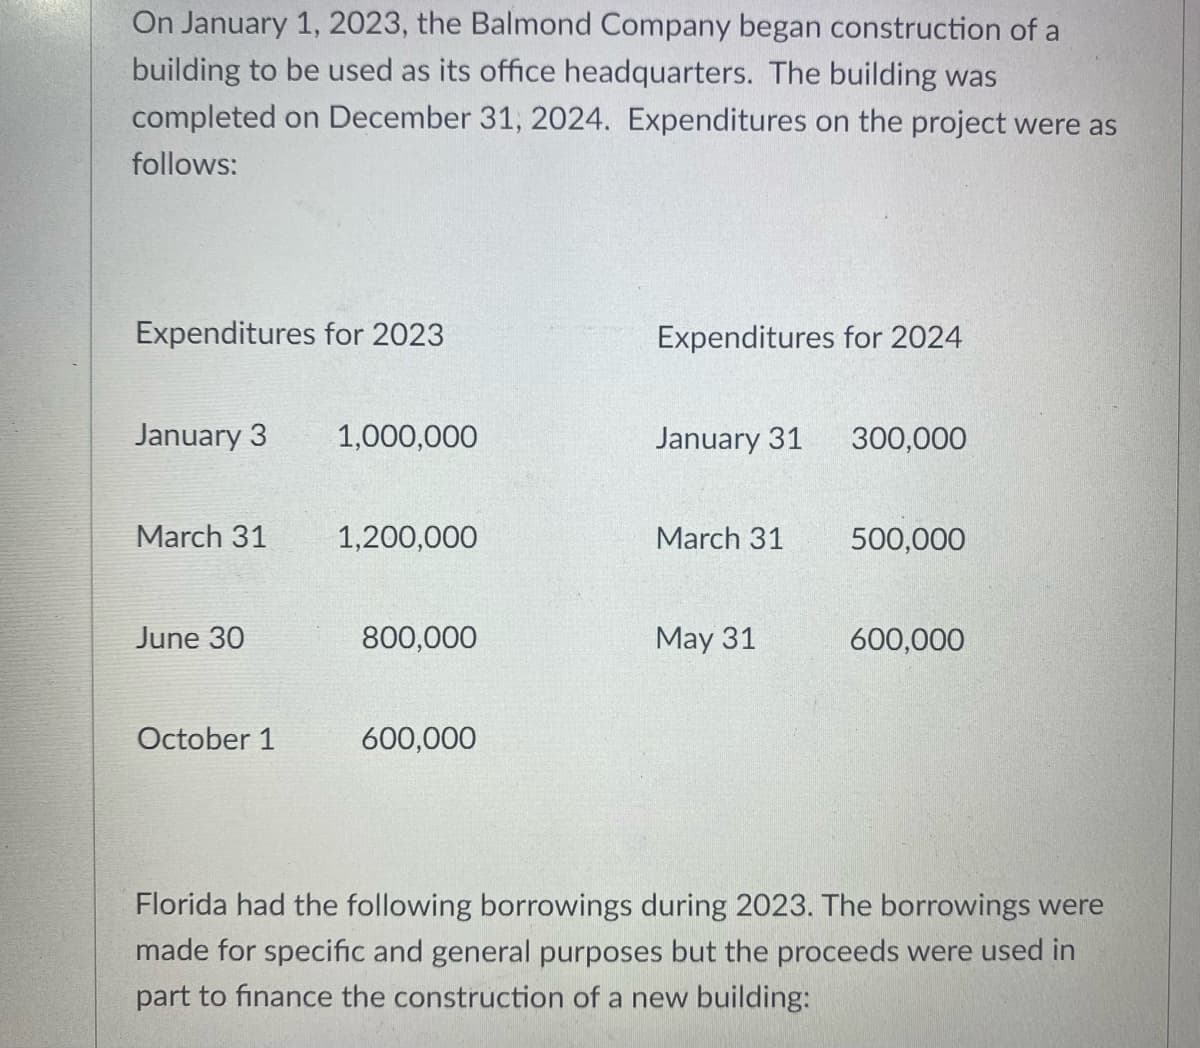 On January 1, 2023, the Balmond Company began construction of a
building to be used as its office headquarters. The building was
completed on December 31, 2024. Expenditures on the project were as
follows:
Expenditures for 2023
Expenditures for 2024
January 3
1,000,000
January 31
300,000
March 31
1,200,000
March 31
500,000
June 30
800,000
May 31
600,000
October 1
600,000
Florida had the following borrowings during 2023. The borrowings were
made for specific and general purposes but the proceeds were used in
part to finance the construction of a new building:
